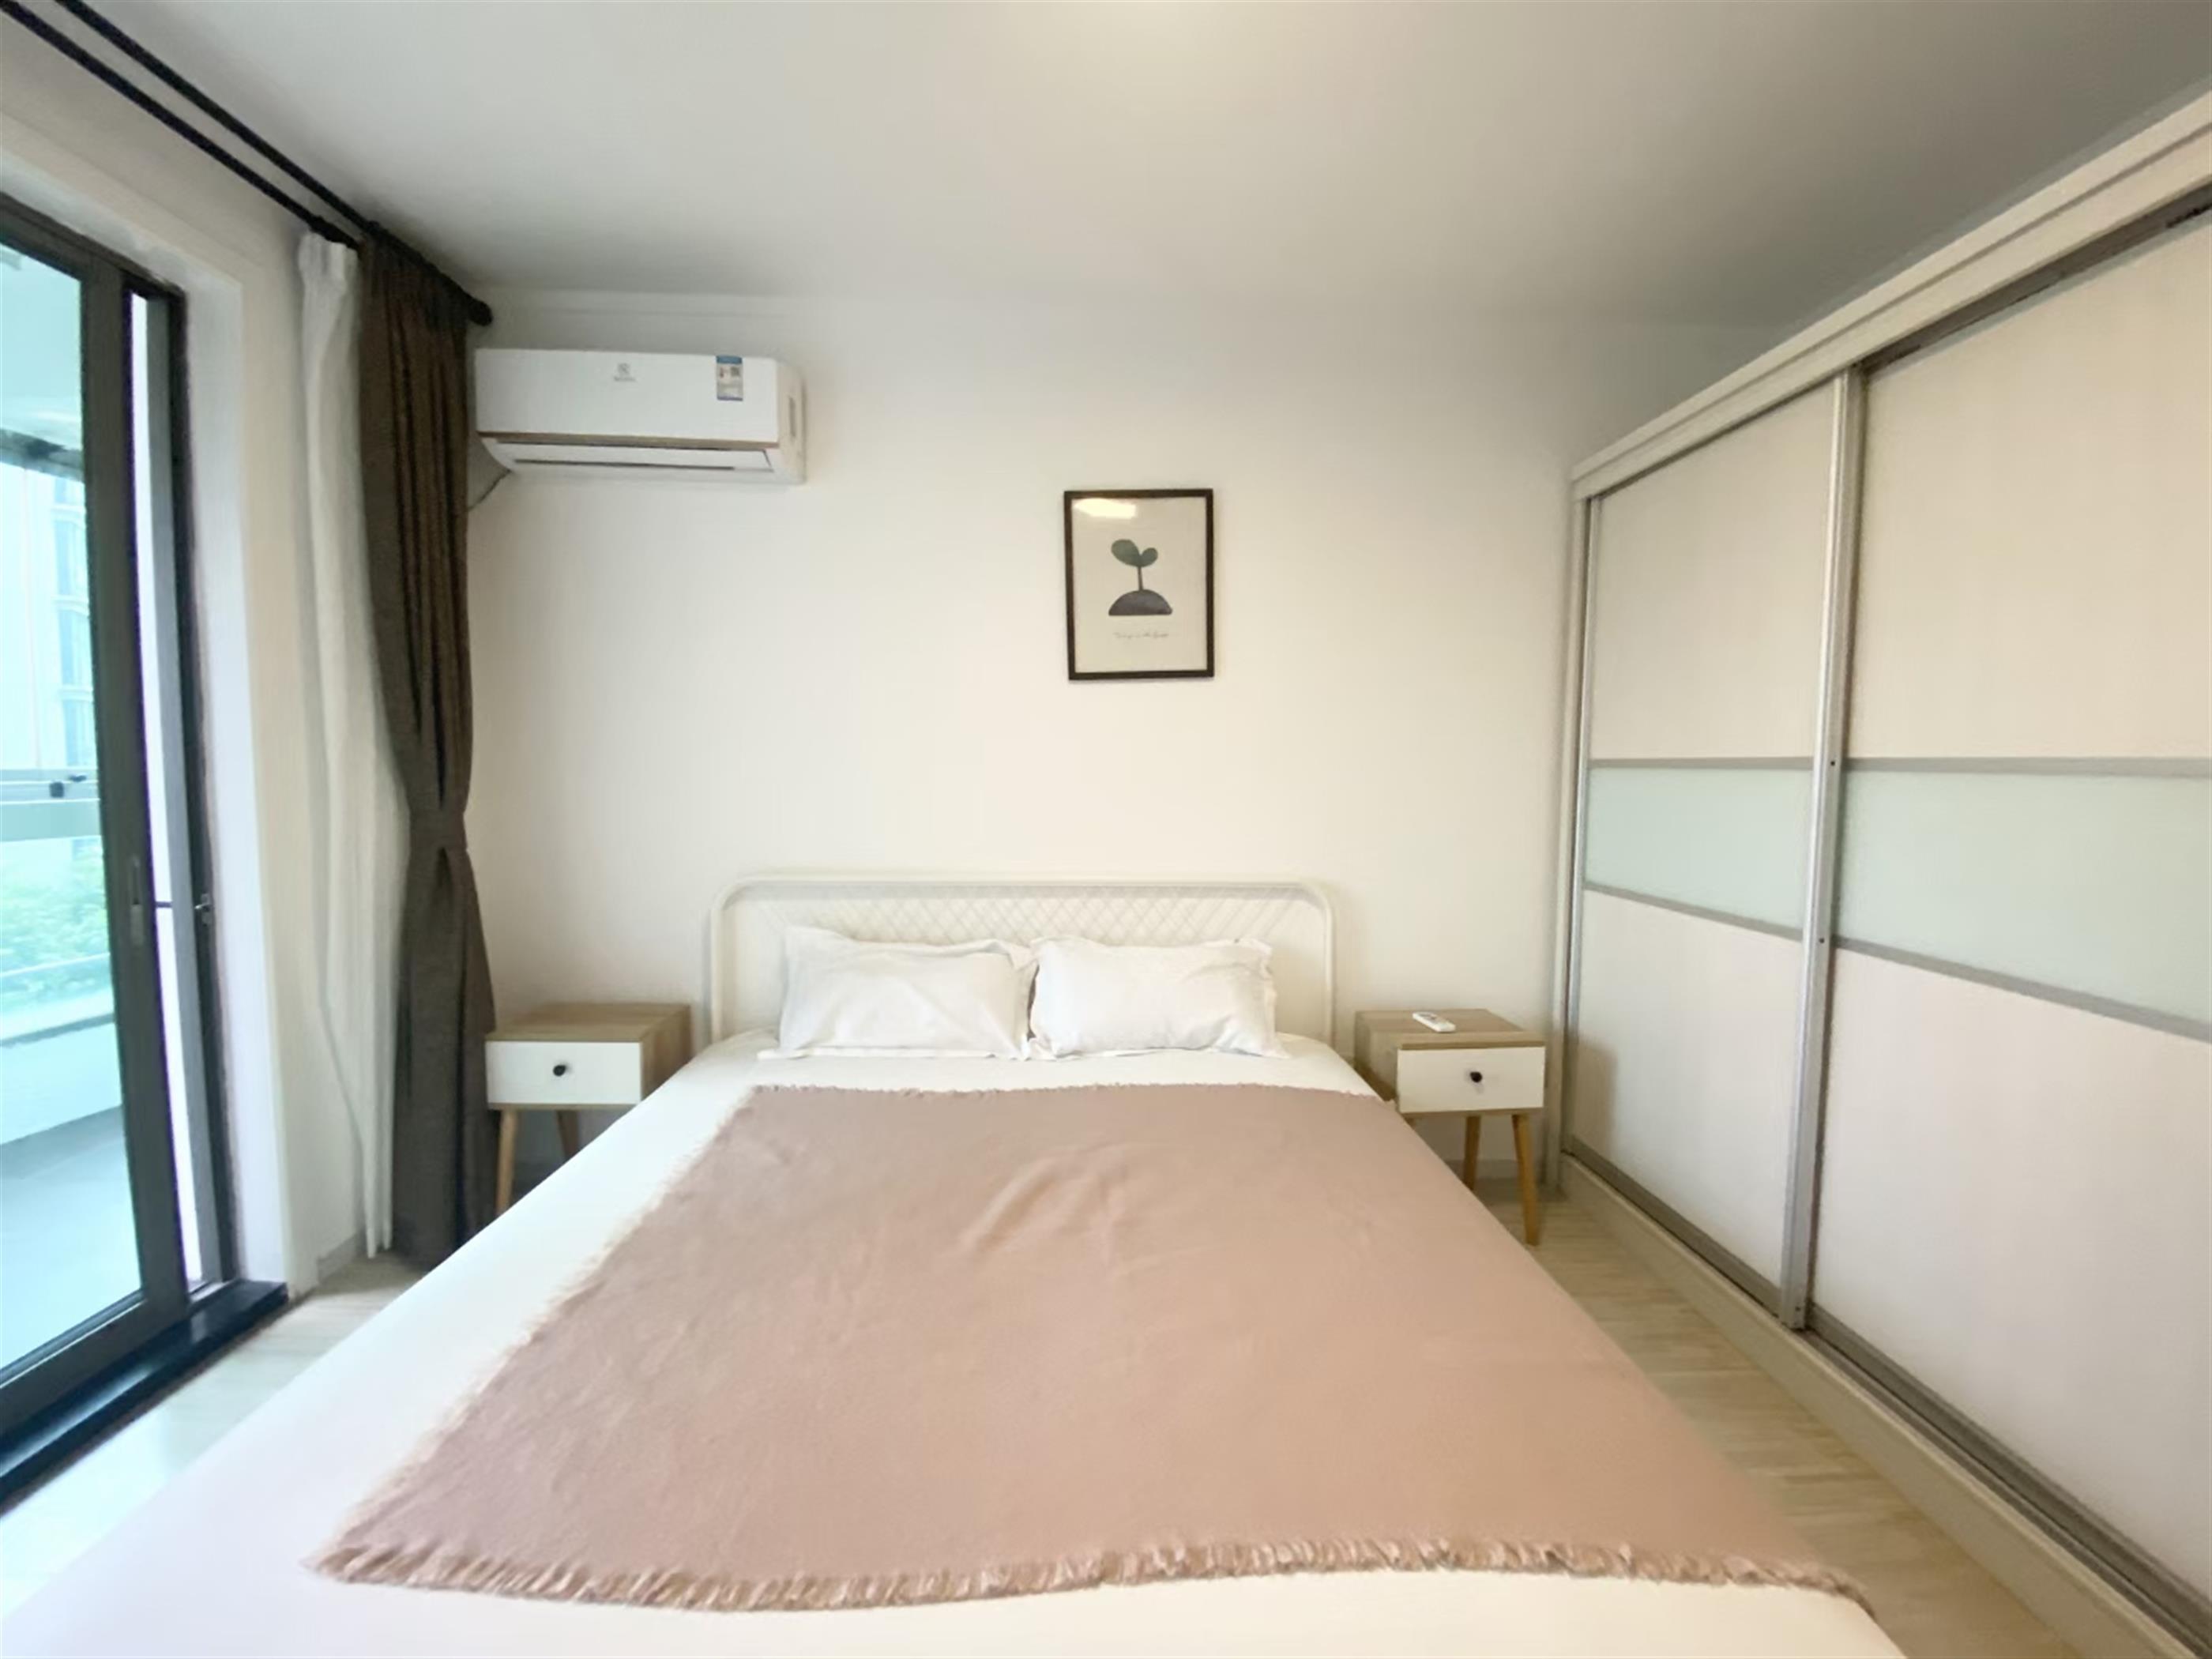 Big new bed Spacious Newly Renovated 2BR Top of City Apt Nr Ln 2/12/13 for Rent in Shanghai